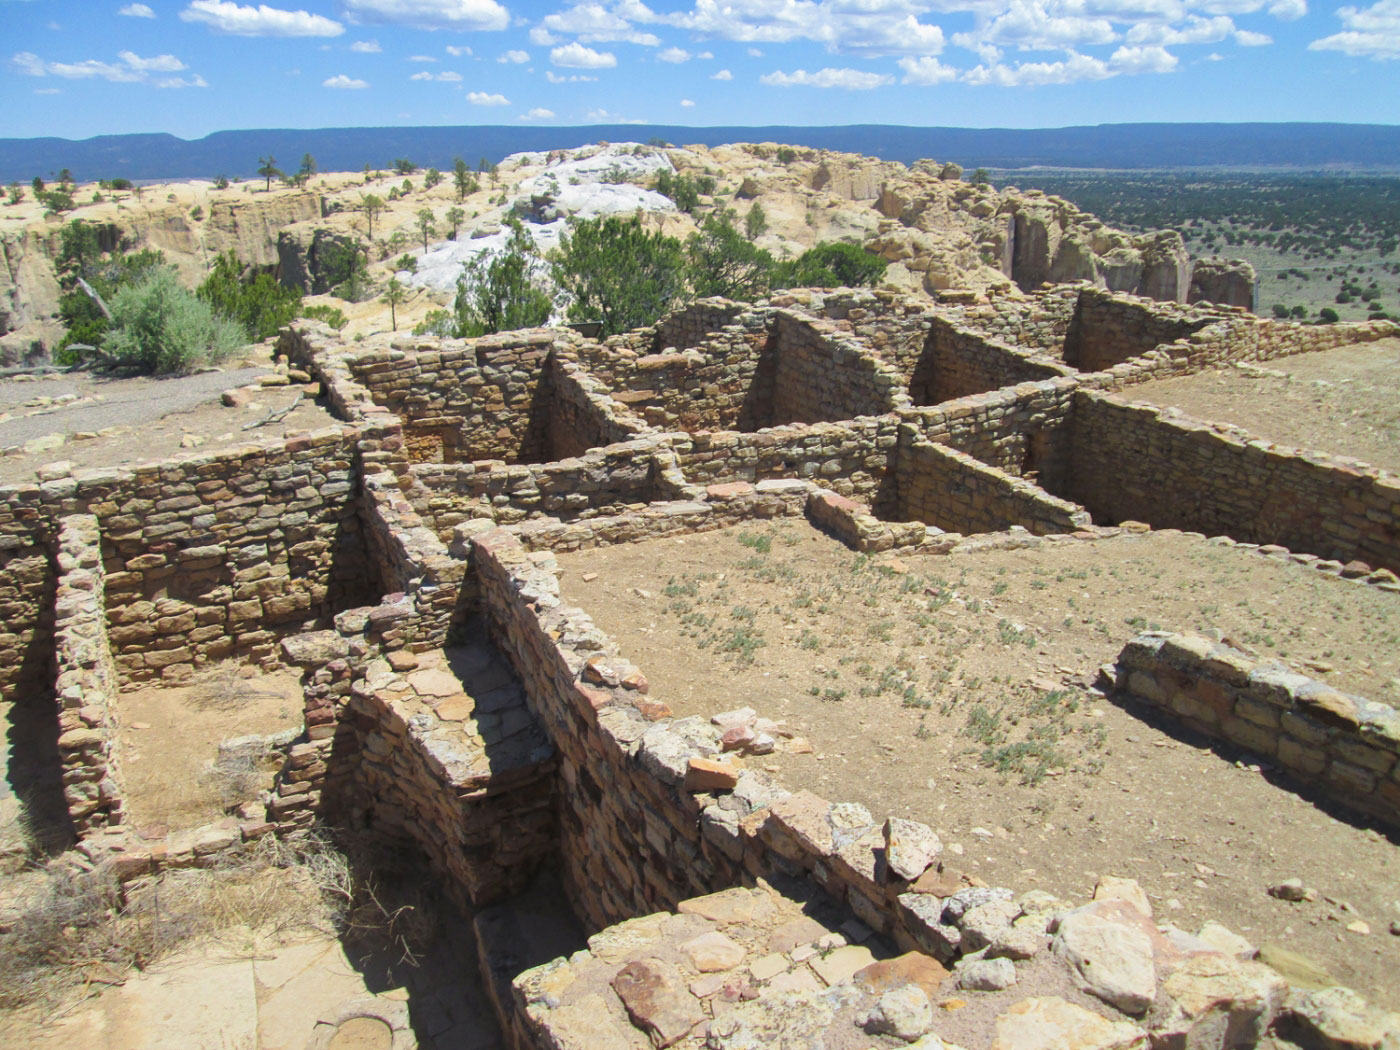 Hike Headland Trail in El Morro National Monument, New Mexico - Stav is Lost